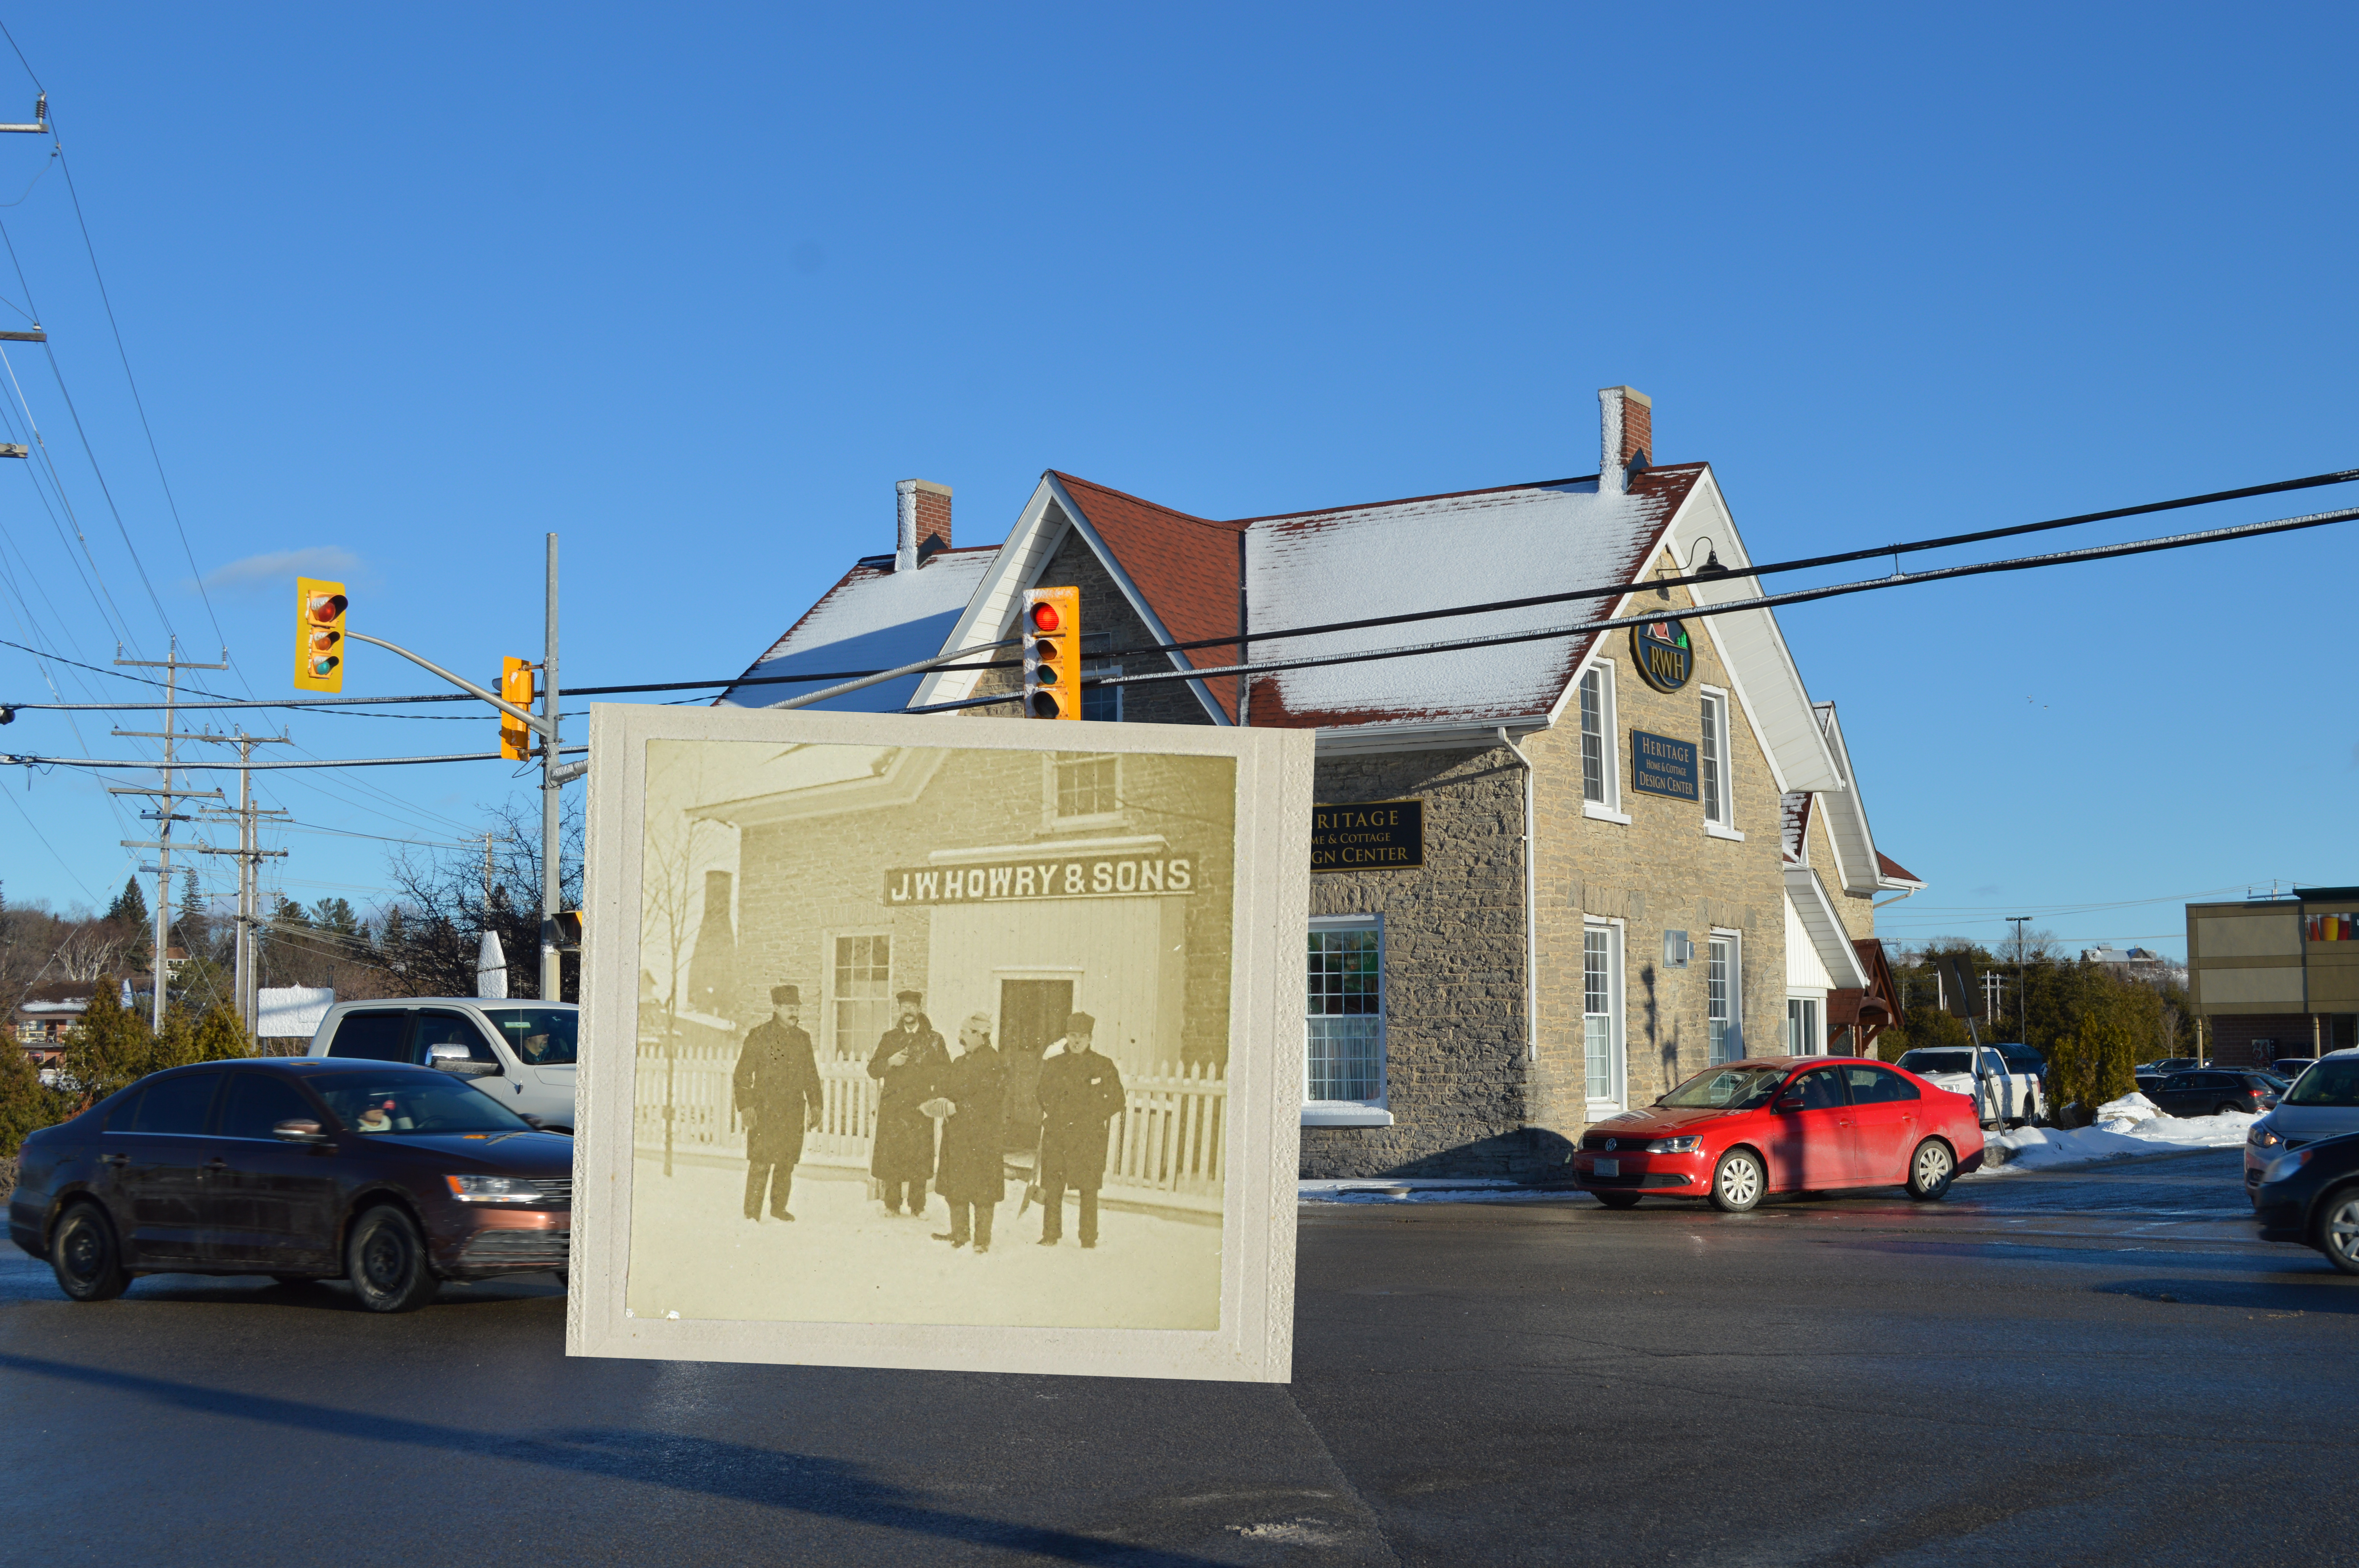 A period photograph of four men standing in front of J.W. Howry & Sons office, superimposed on a contemporary RWH Construction office